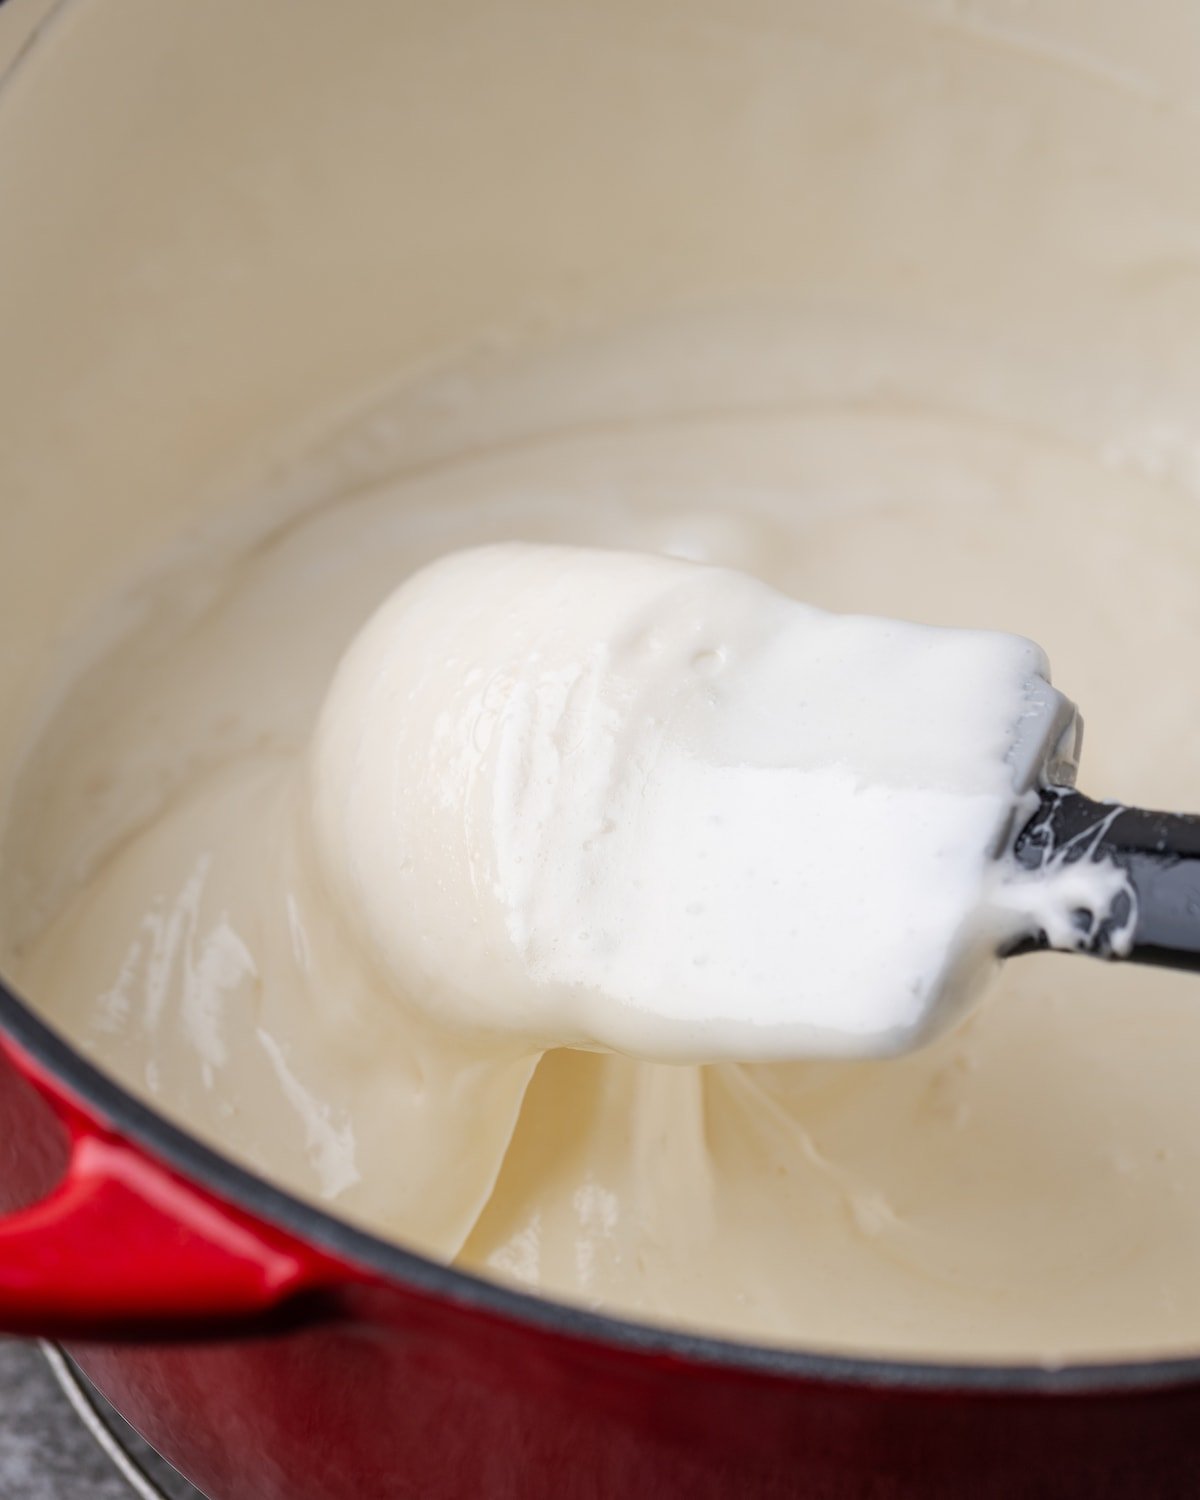 A spatula stirs the melted marshmallow and butter mixture in a red pot.